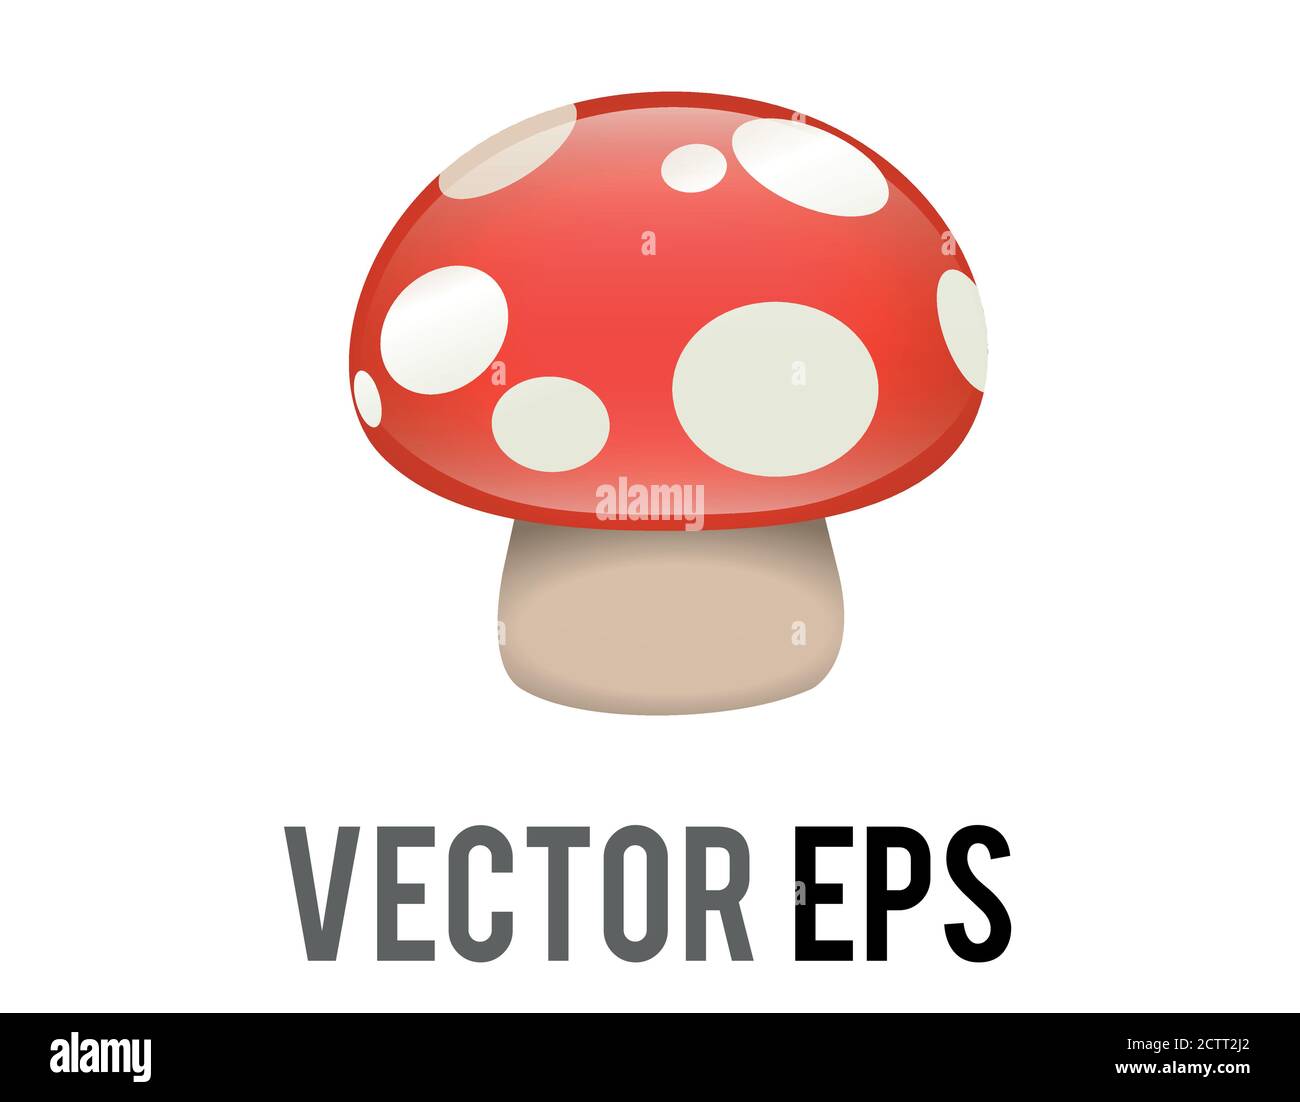 The isolated vector edible fungus of mushroom icon, depicted as toadstool with white spotted red cap, stem Stock Vector